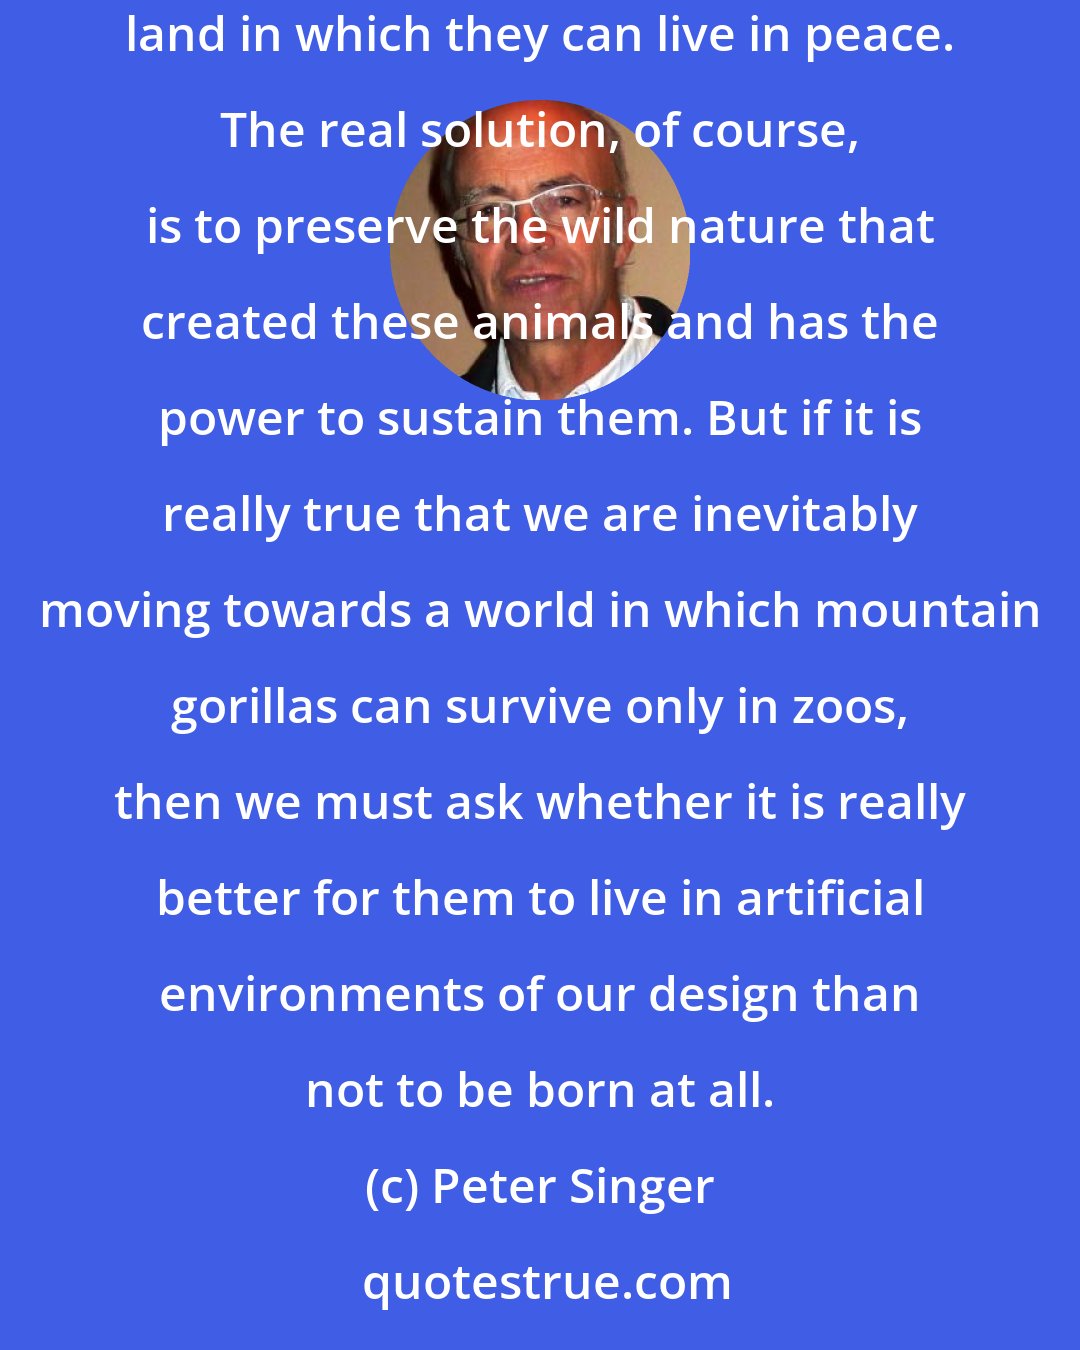 Peter Singer: If zoos are like arks, then rare animals are like passengers on a voyage of the damned, never to find a port that will let them dock or a land in which they can live in peace. The real solution, of course, is to preserve the wild nature that created these animals and has the power to sustain them. But if it is really true that we are inevitably moving towards a world in which mountain gorillas can survive only in zoos, then we must ask whether it is really better for them to live in artificial environments of our design than not to be born at all.